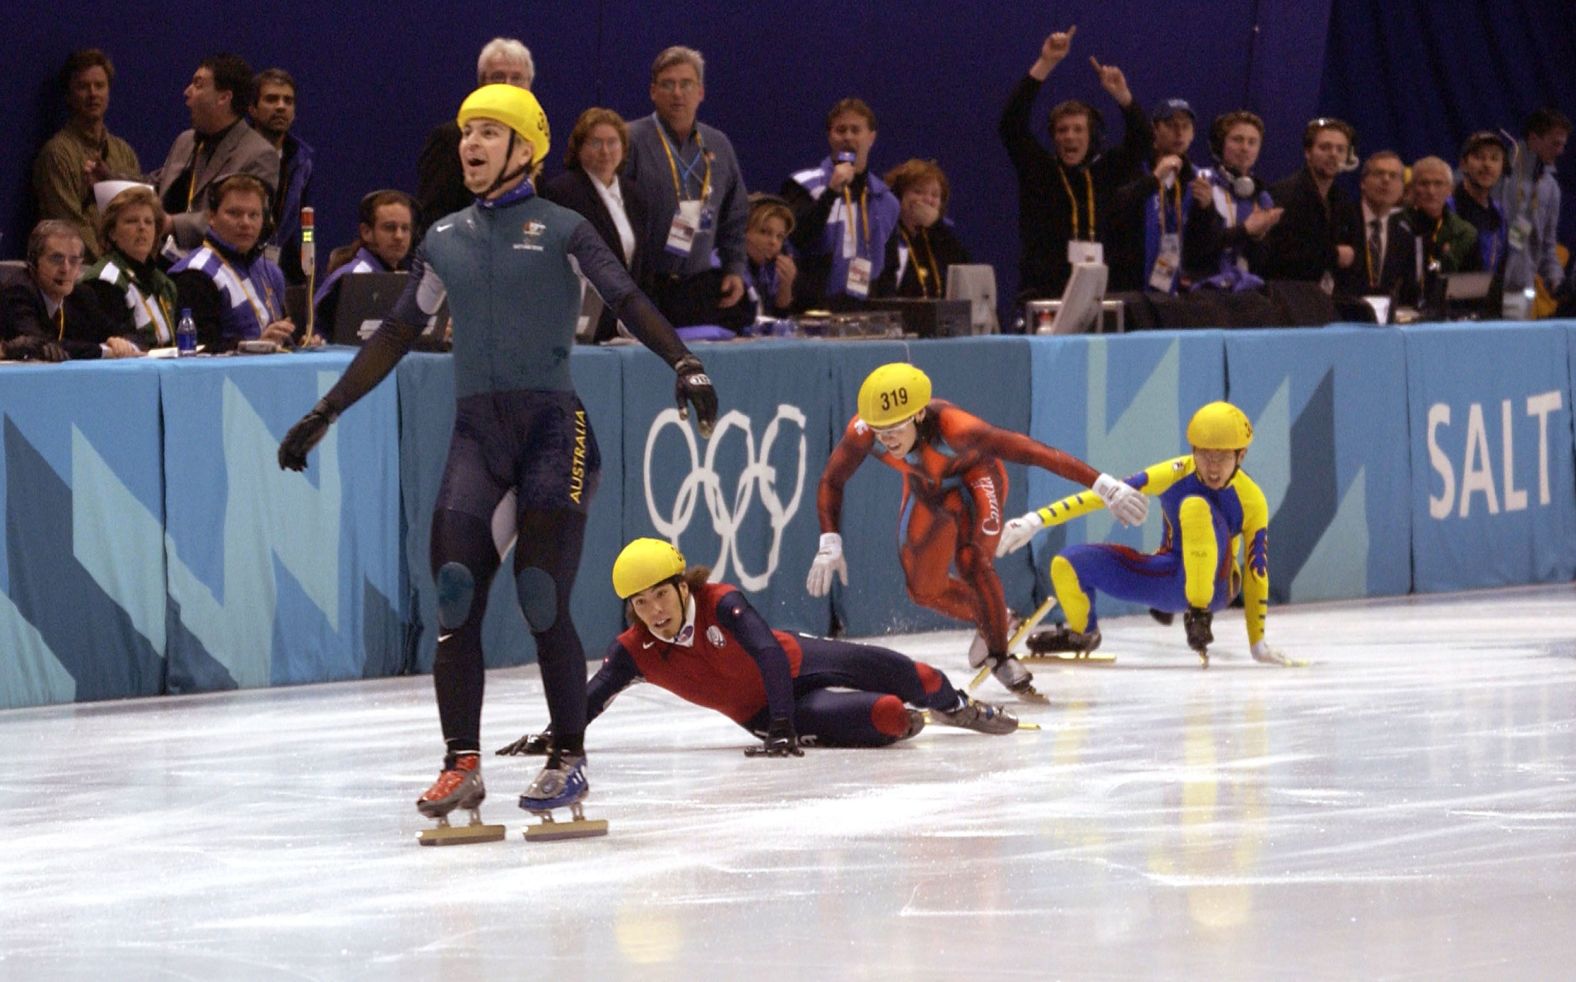 Steven Bradbury, a short-track speedskater from Australia, was in last place as the 1,000-meter final was about to end in 2002. Then all four of his competitors crashed on the final turn, allowing him to breeze to the finish line and win the gold medal — the first for any Winter Olympian from Australia.